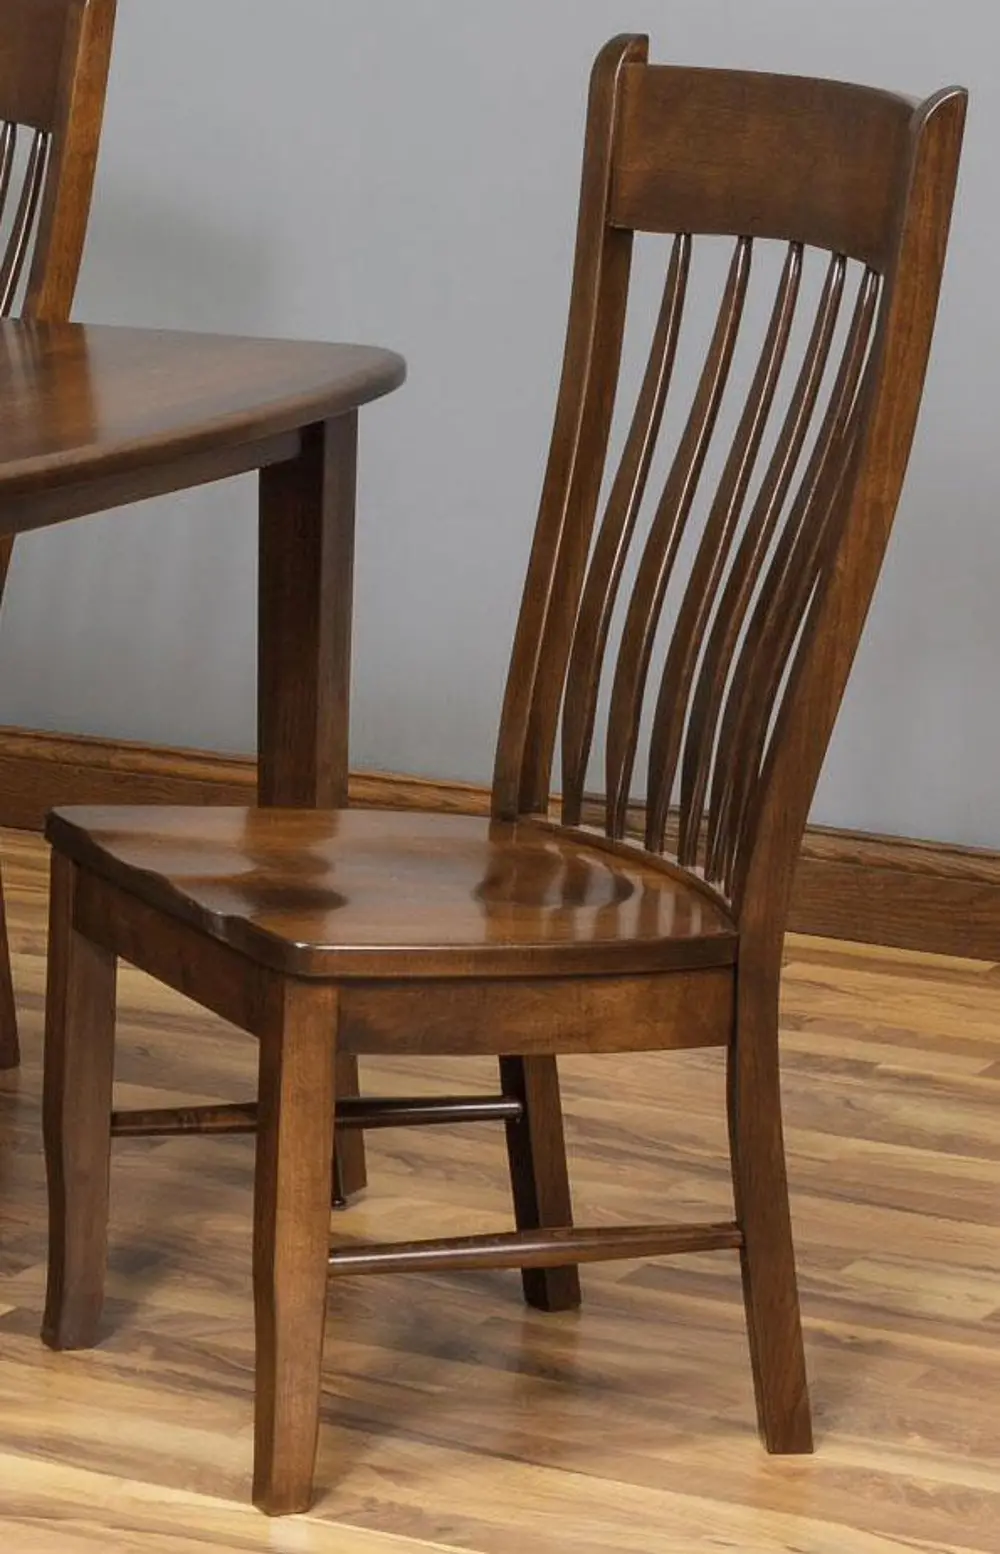 Maple Toffee Dining Room Chair - Buckeye Collection-1